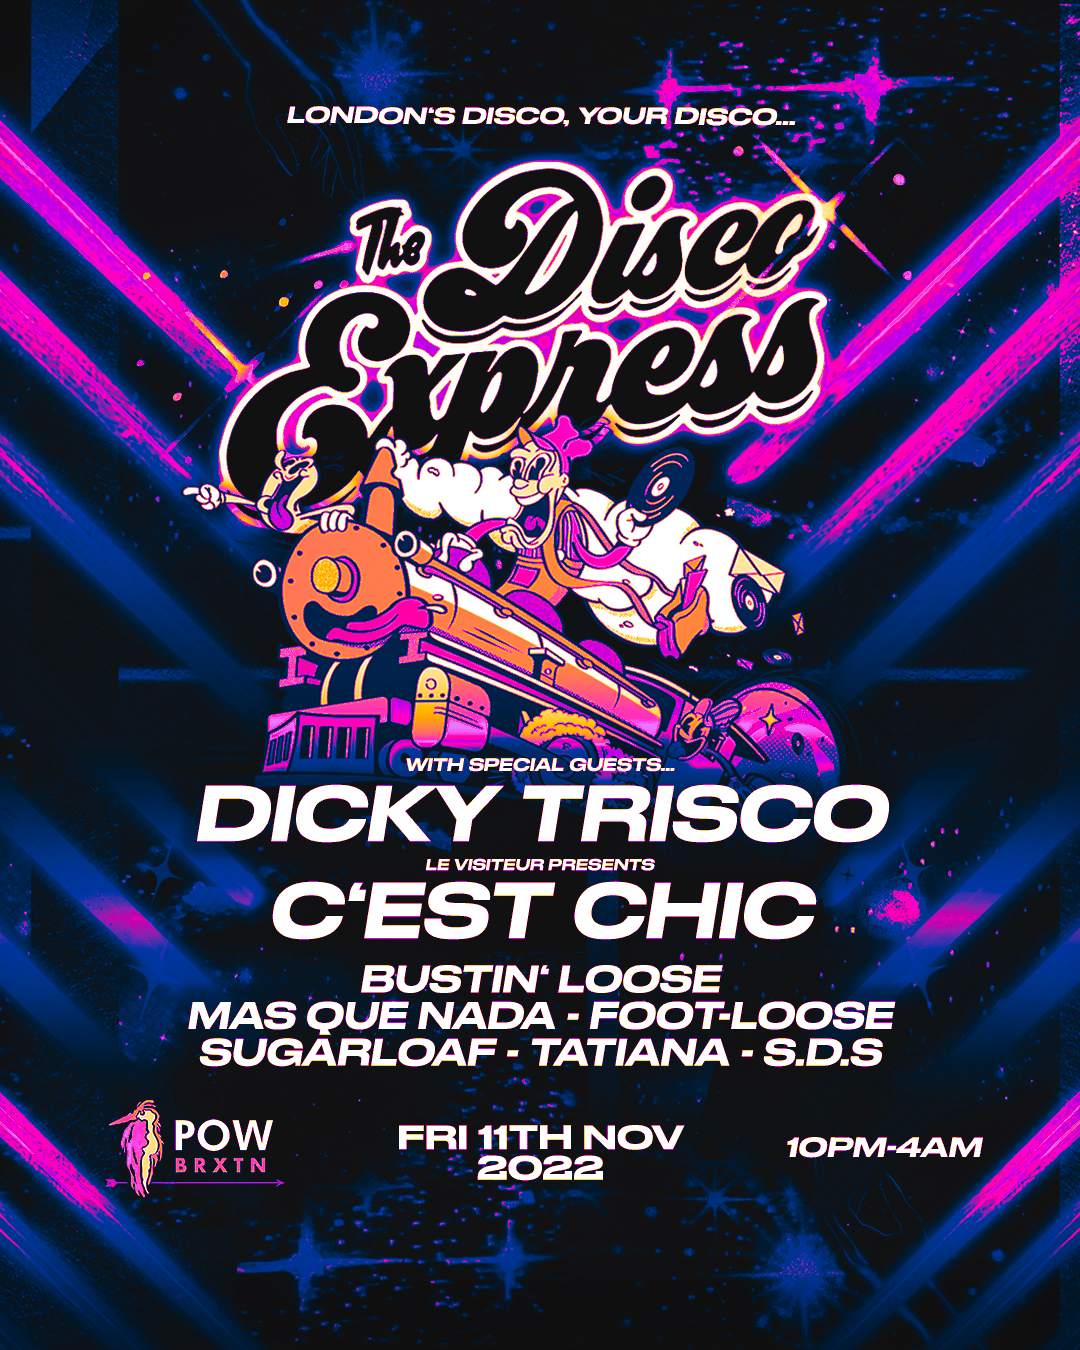 The Disco Express: Dicky Trisco, C'est Chic - フライヤー表